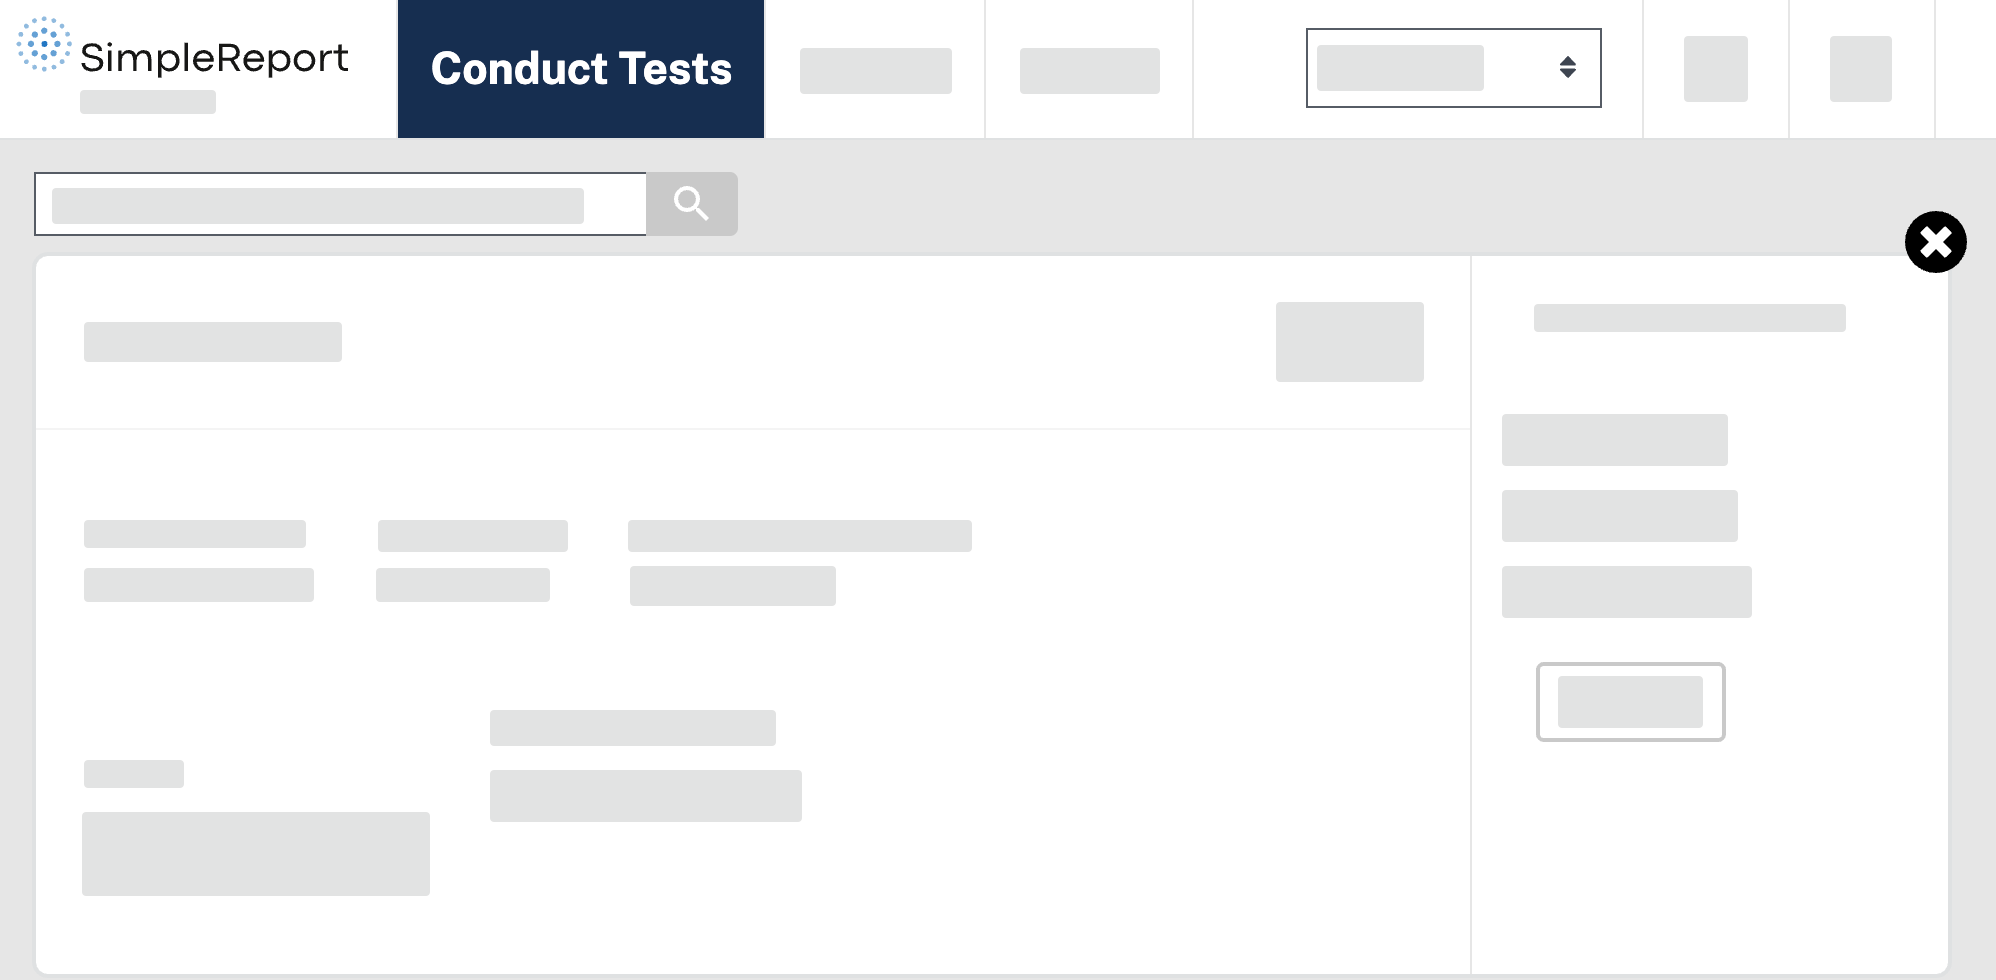 The SimpleReport site with the "Conduct Tests" tab chosen in the top navigation